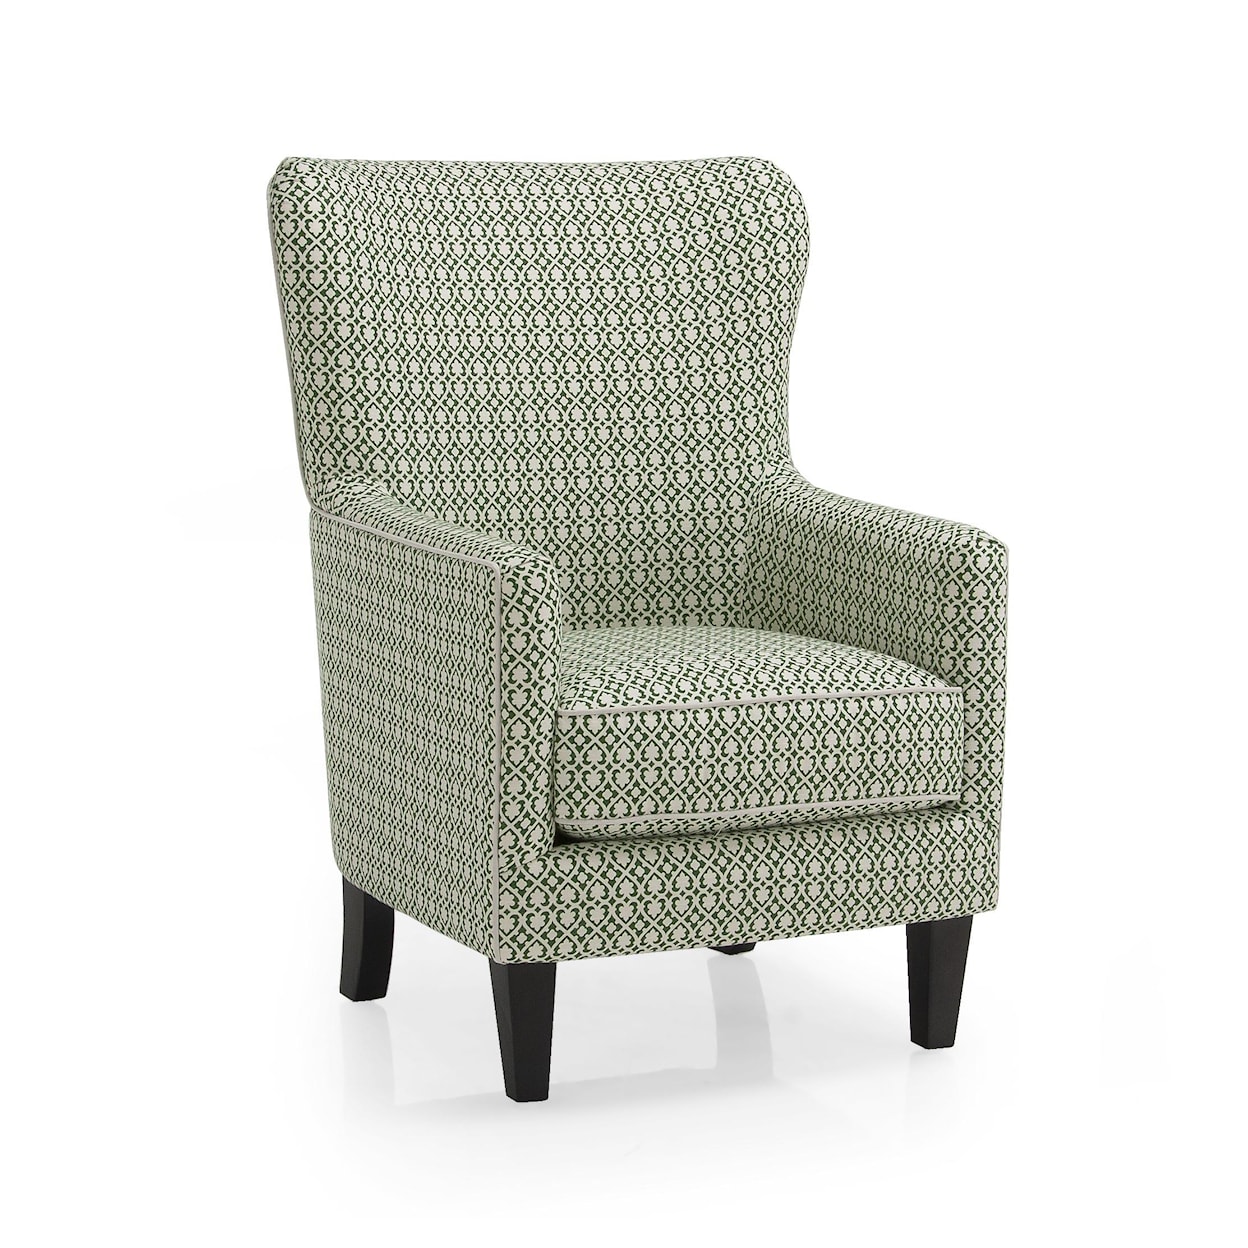 Decor-Rest 2379 Contemporary Wing Back Chair